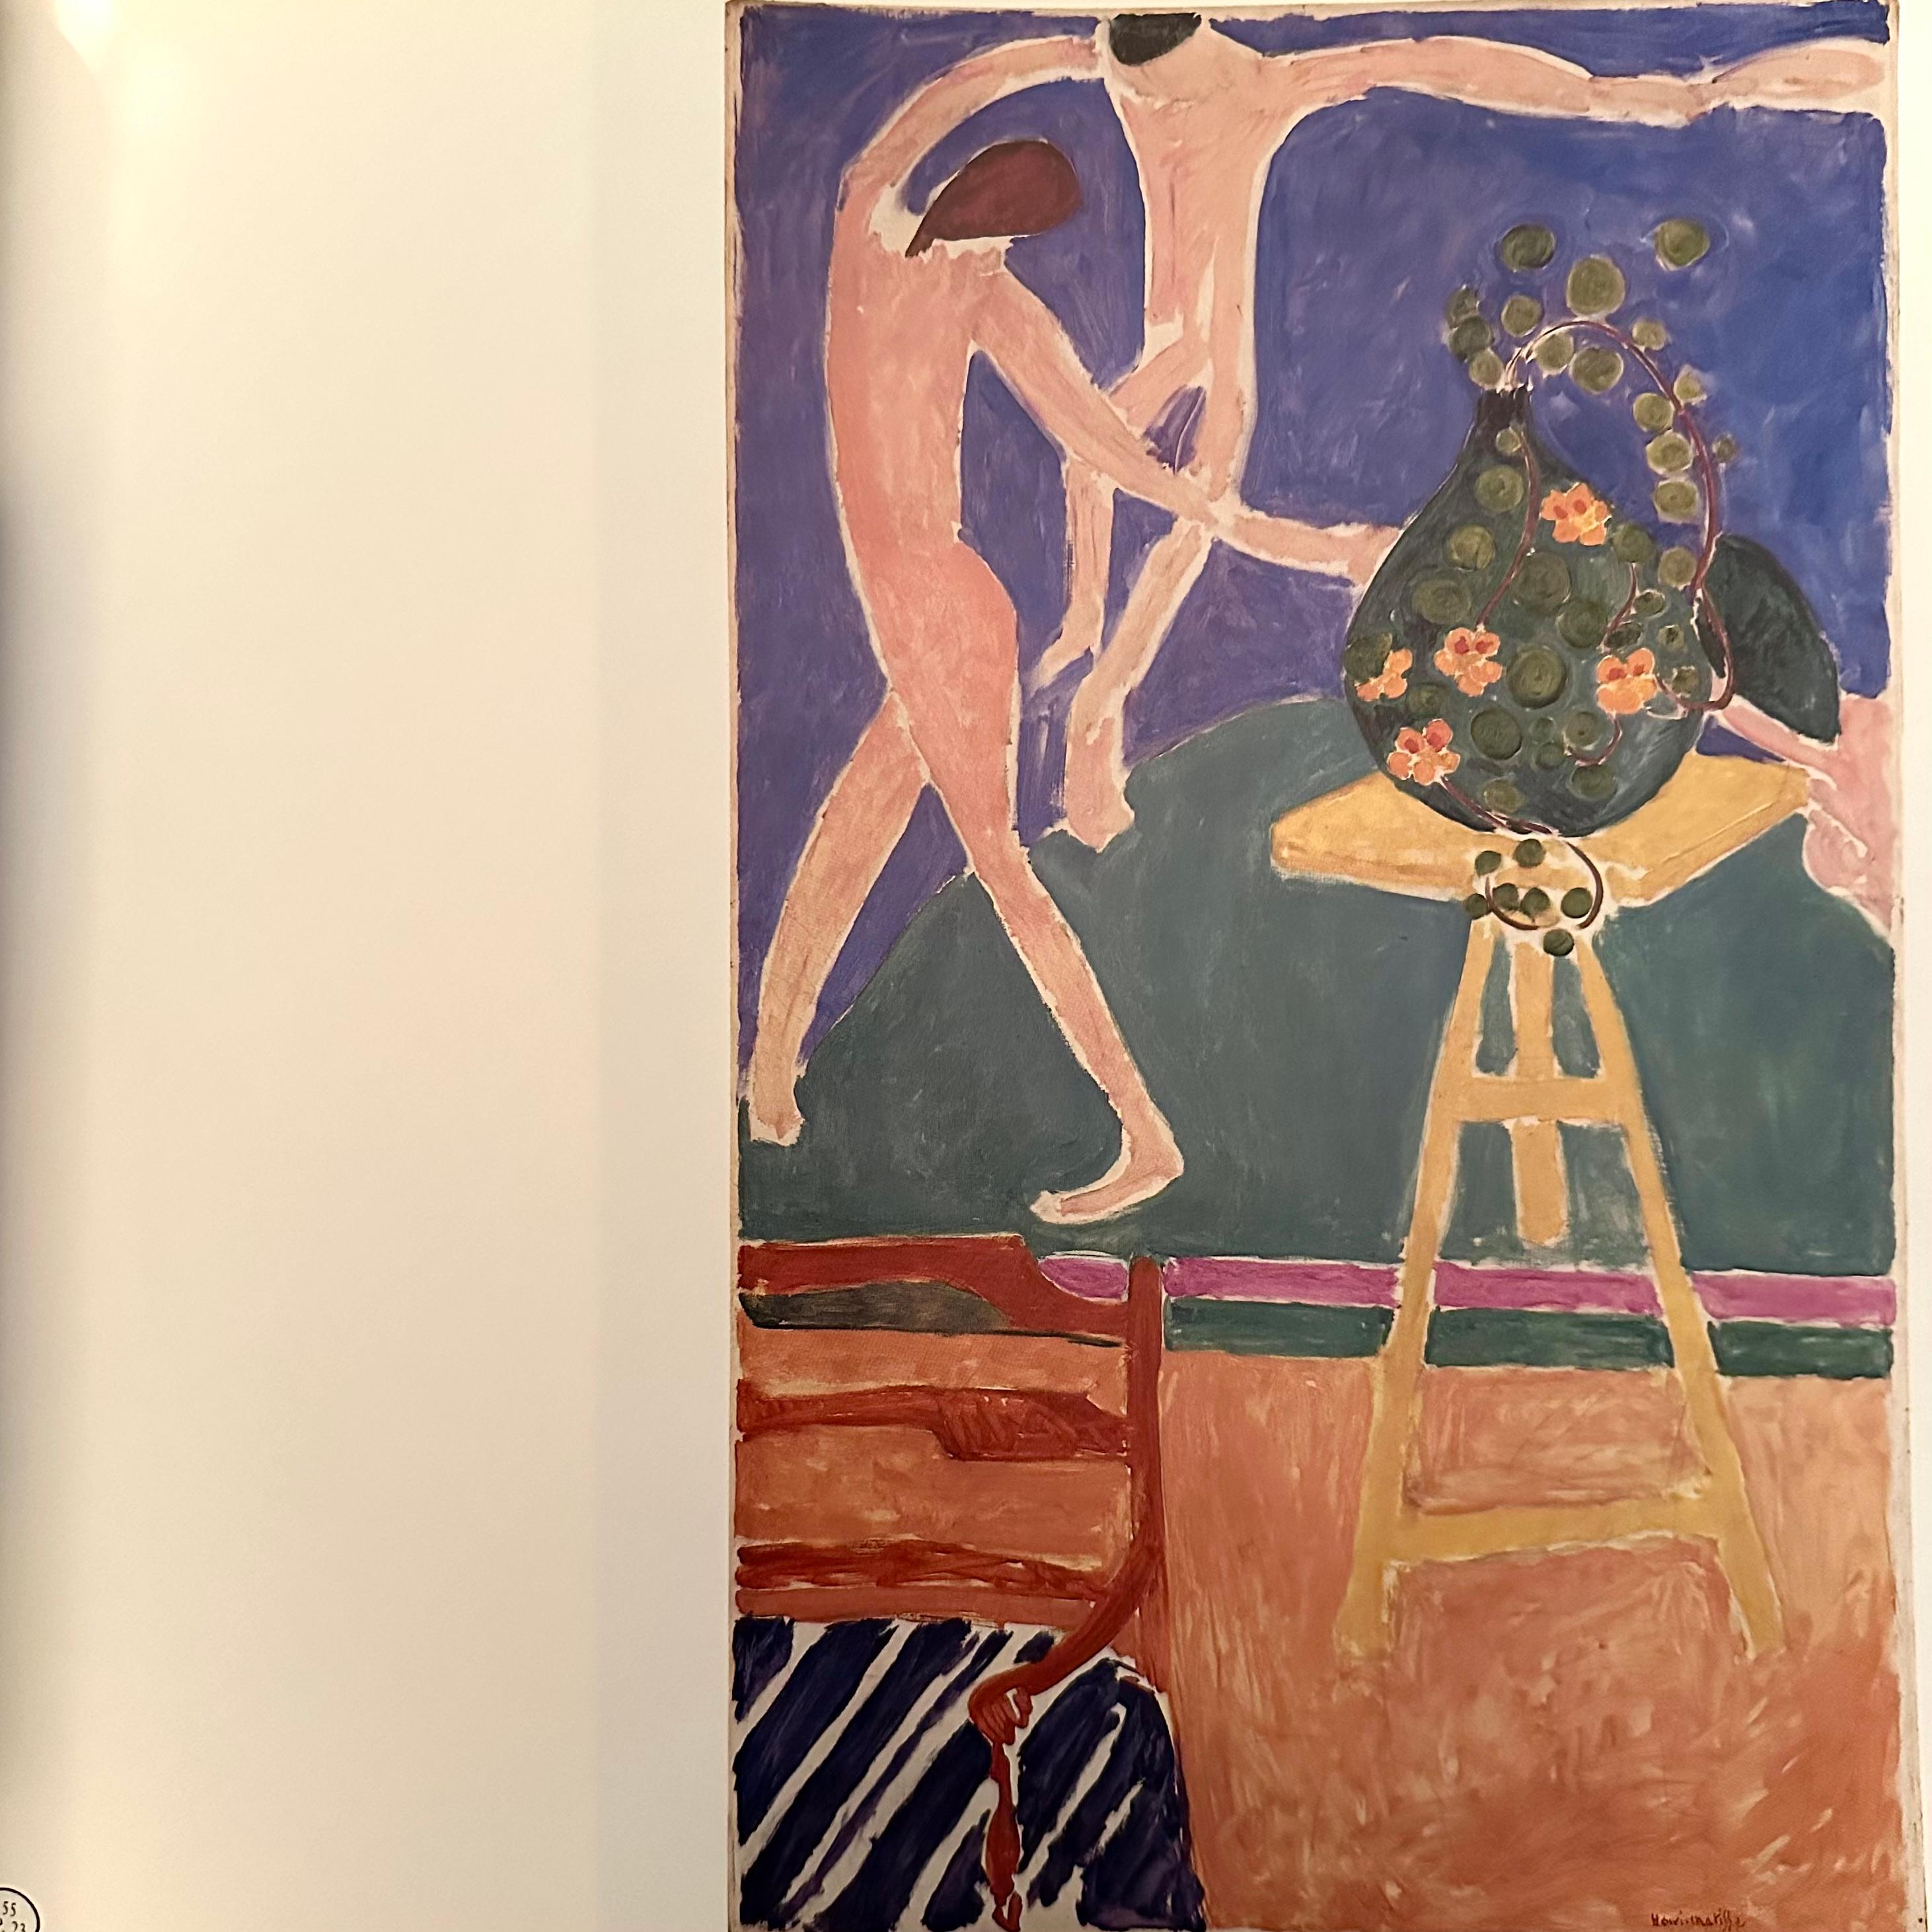 Published by Guillaud Editions, 1st edition, Paris, 1987. Hardback with French text. 

This monograph presents the full range of Matisse’s oeuvre, from his early oil paintings, to etchings, pencil drawings, gouaches and his later paper collages.